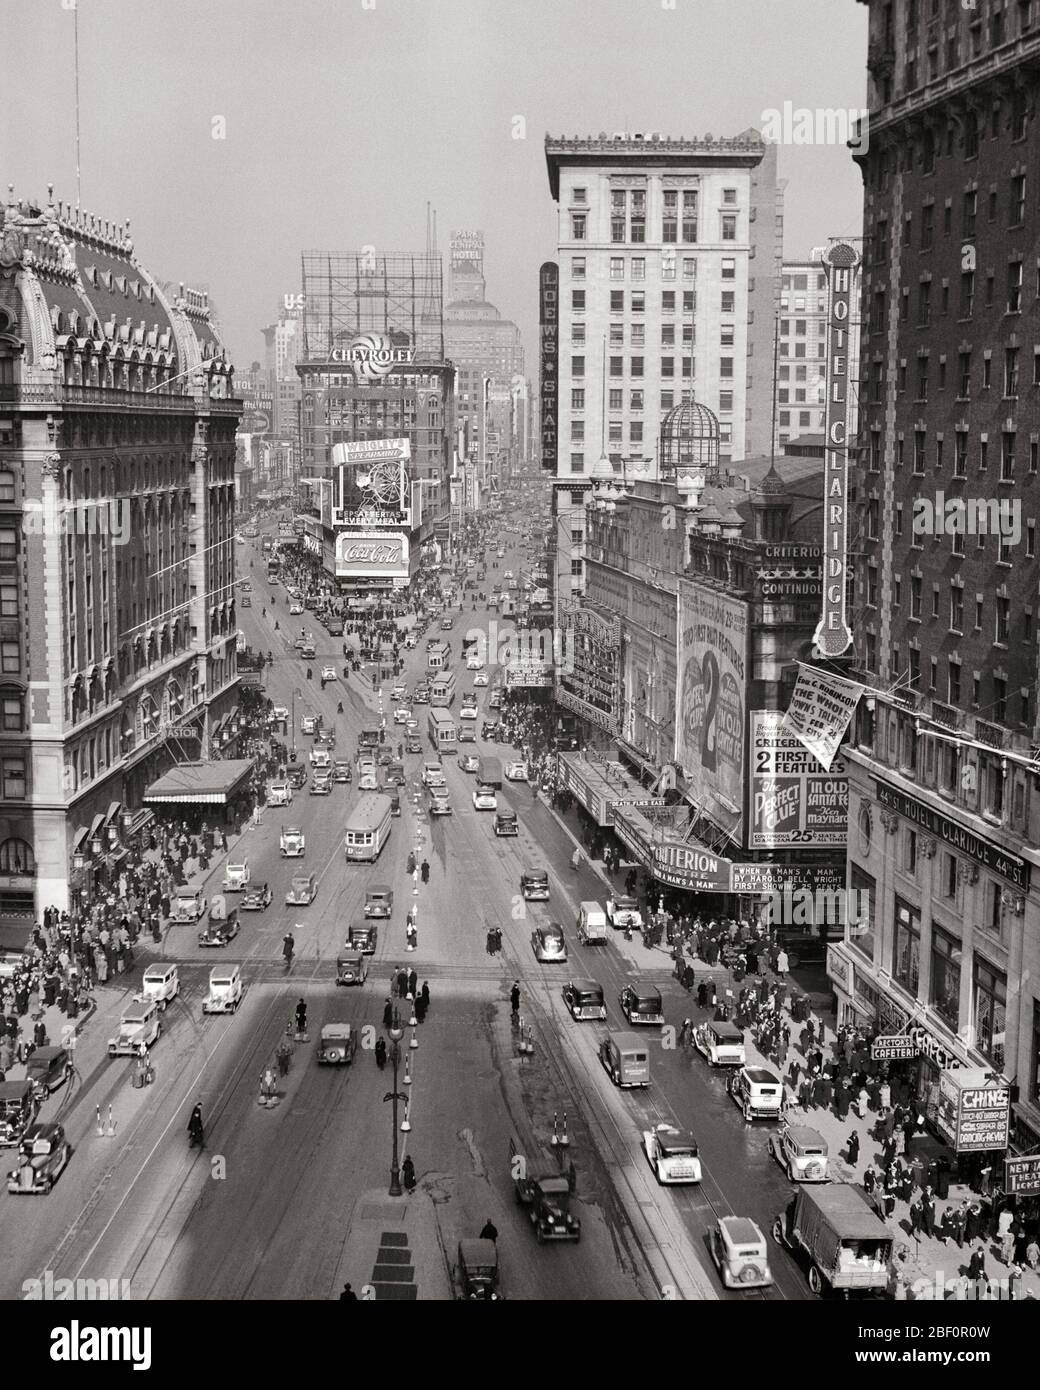 1930s NEW YORK CITY  TIMES SQUARE LOOKING NORTH UP BROADWAY TO DUFFY SQUARE FROM ORIGINAL TIMES TOWER SEEN AS A SHADOW - q45982 CPC001 HARS PERSONS INSPIRATION UNITED STATES OF AMERICA AUTOMOBILE MALES PEDESTRIANS ENTERTAINMENT TRANSPORTATION B&W TOWER DREAMS MIDTOWN HIGH ANGLE ADVENTURE AUTOS EXTERIOR GOTHAM OPPORTUNITY UP NYC HOTEL ASTOR ORIGINAL NEW YORK AUTOMOBILES CITIES VEHICLES NEW YORK CITY TIMES SQUARE BROADWAY THEATER DISTRICT THEATERS BIG APPLE BLACK AND WHITE DUFFY GREAT WHITE WAY OLD FASHIONED Stock Photo